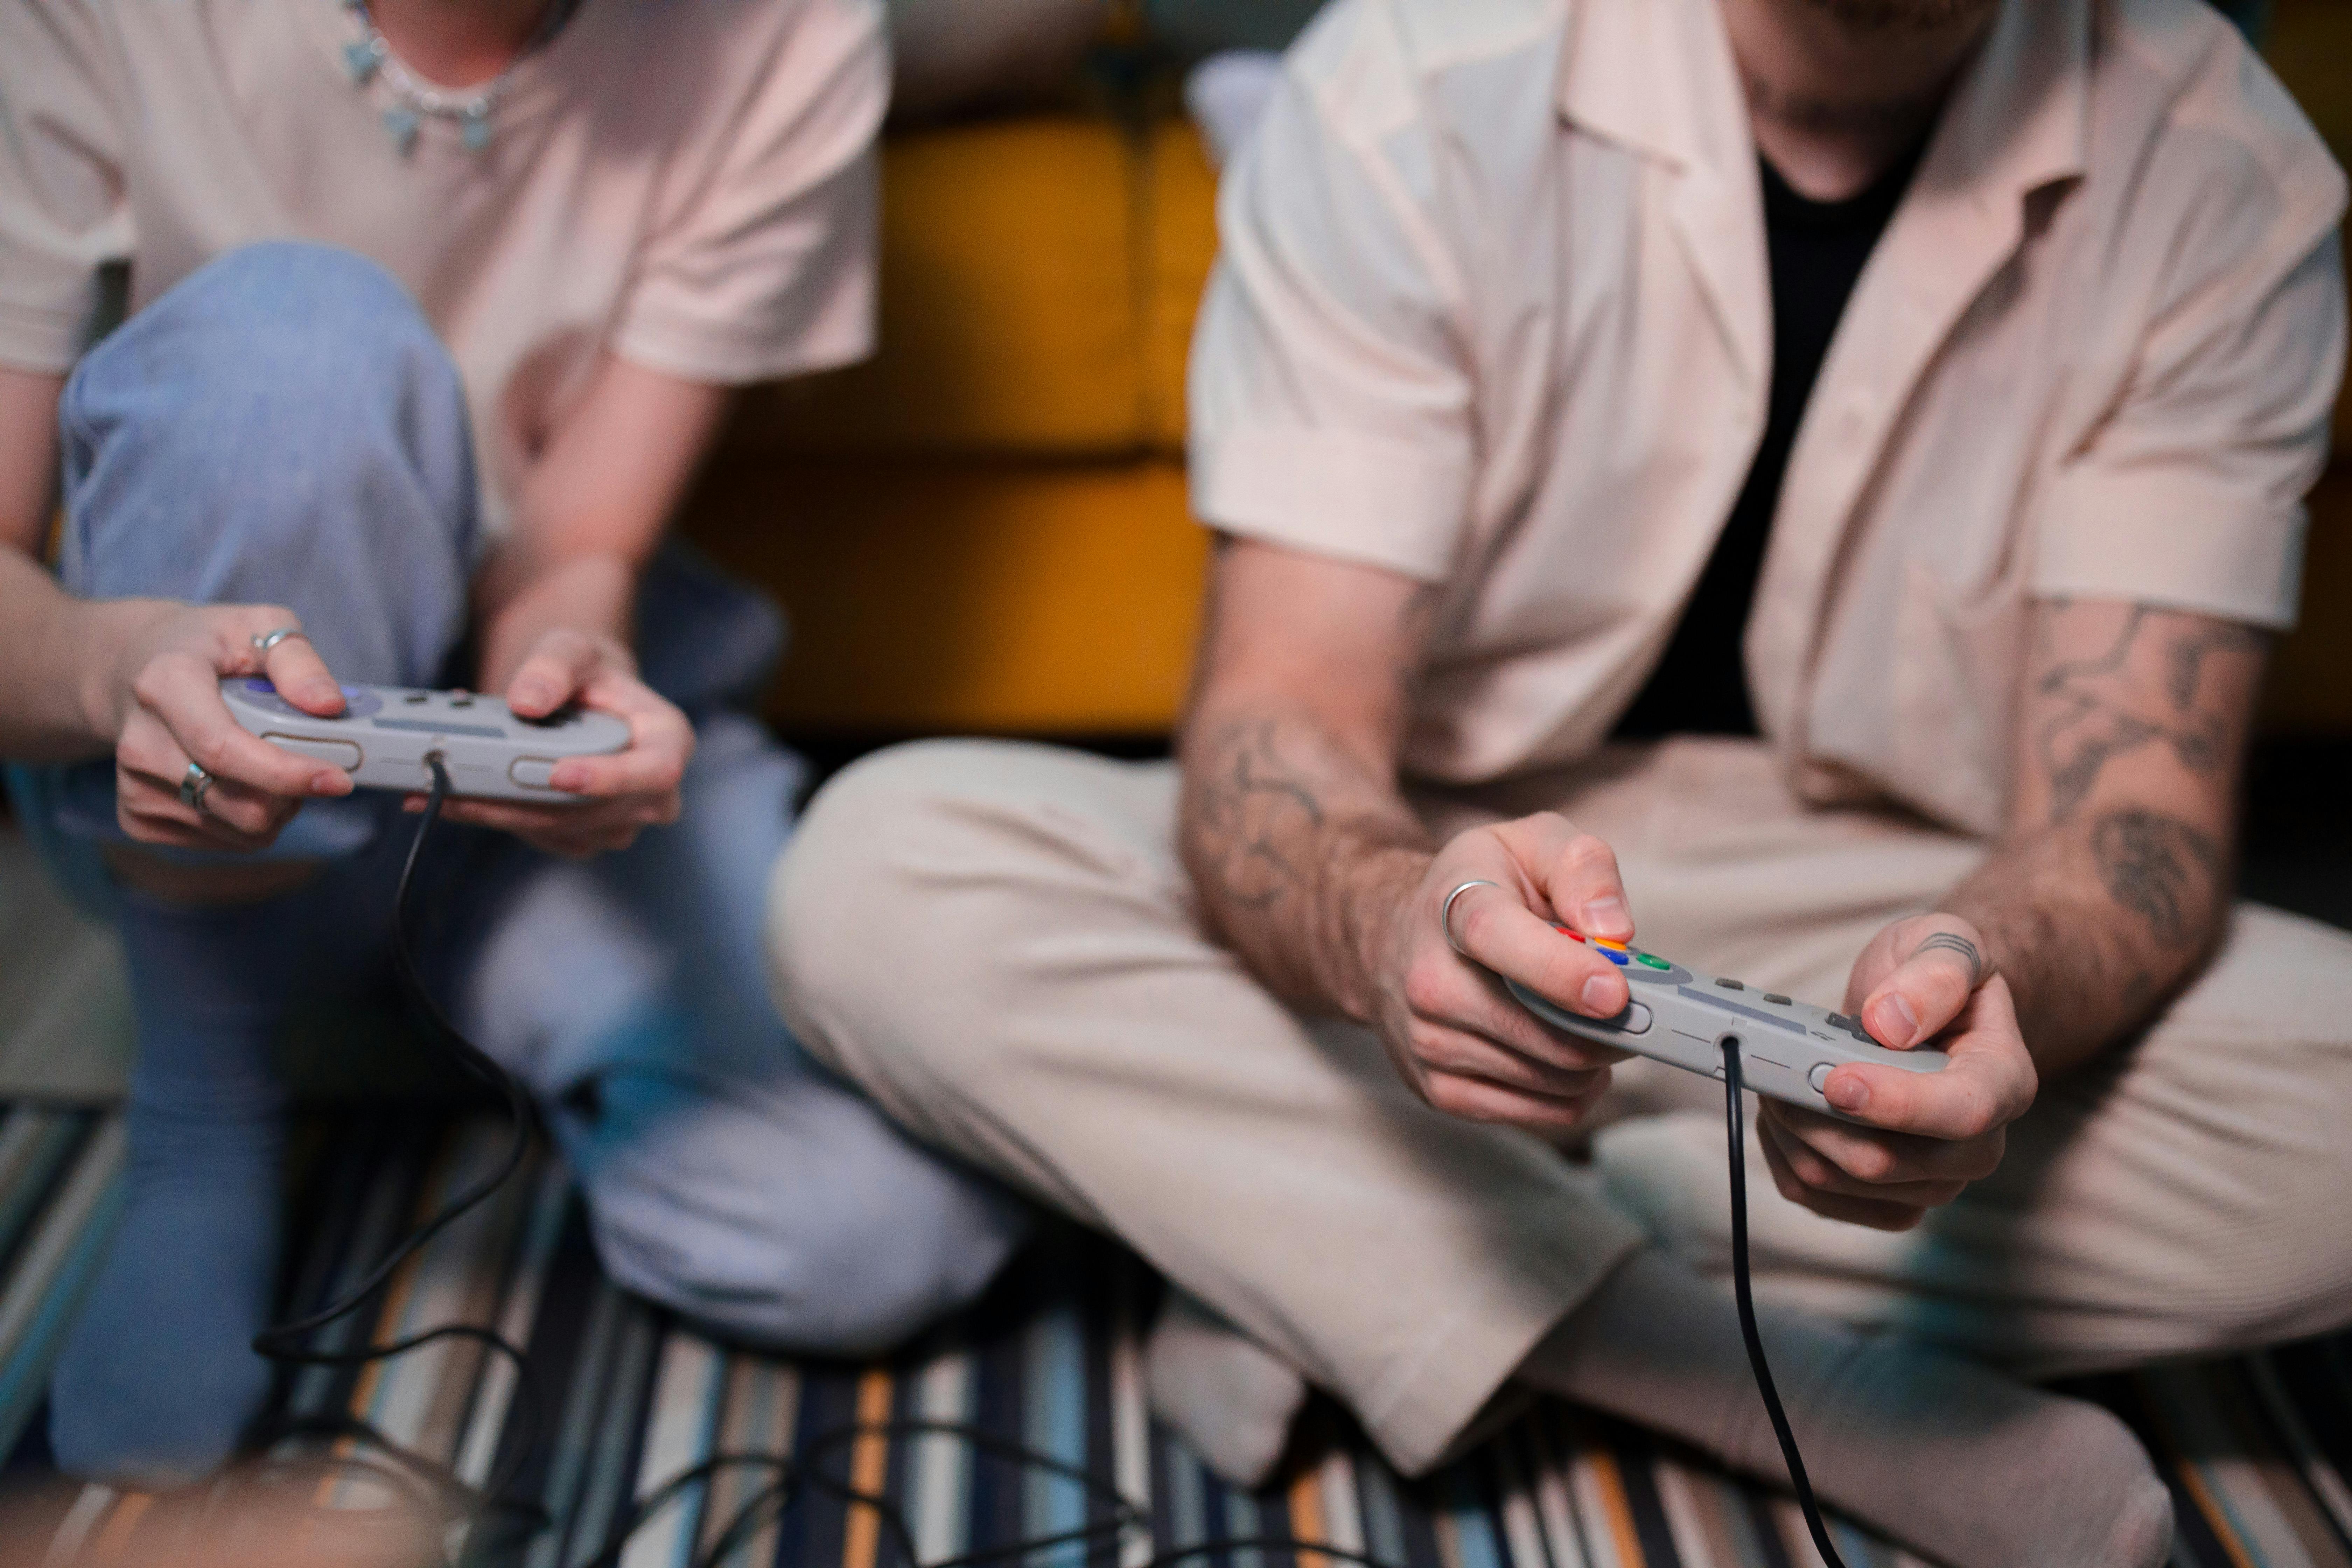 5,100+ Play Retro Games Online Stock Photos, Pictures & Royalty-Free Images  - iStock